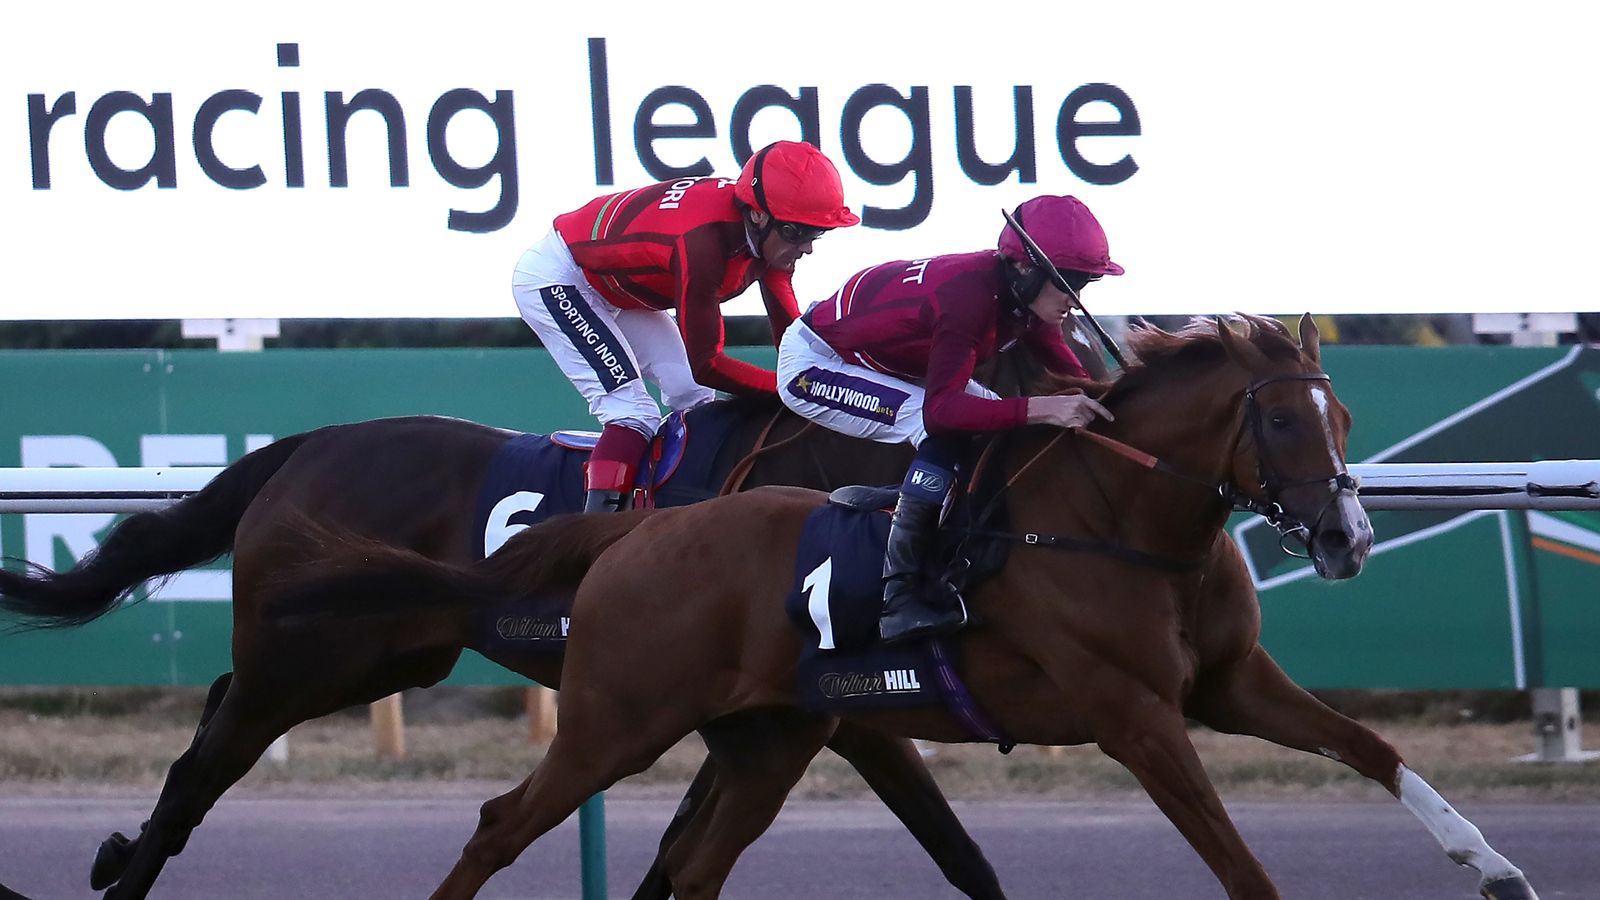 Racing League: Wales & The West head to Windsor with ‘solid team’ and sights fixed on knocking London & The South off the top